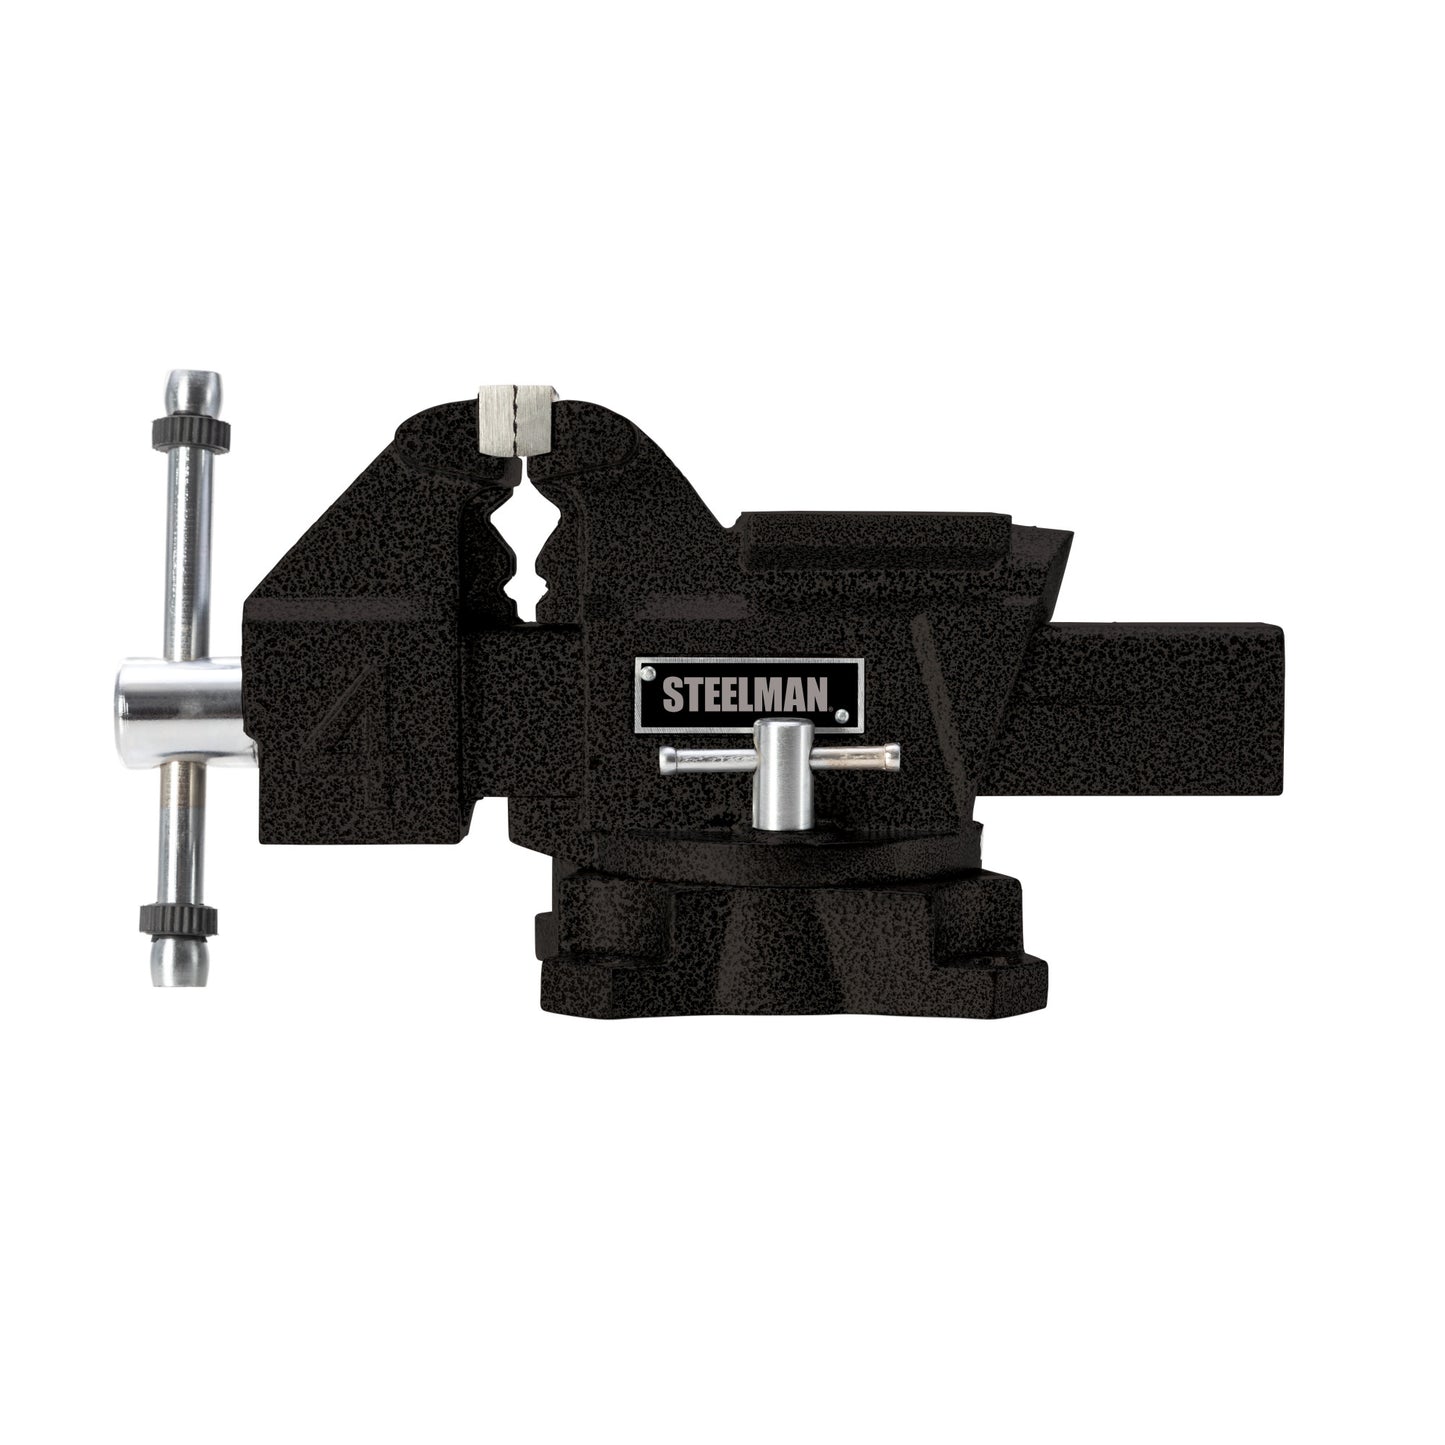 4-Inch Bench Vise with 360-degree Swivel Base, Serrated Steel Jaws, Gray